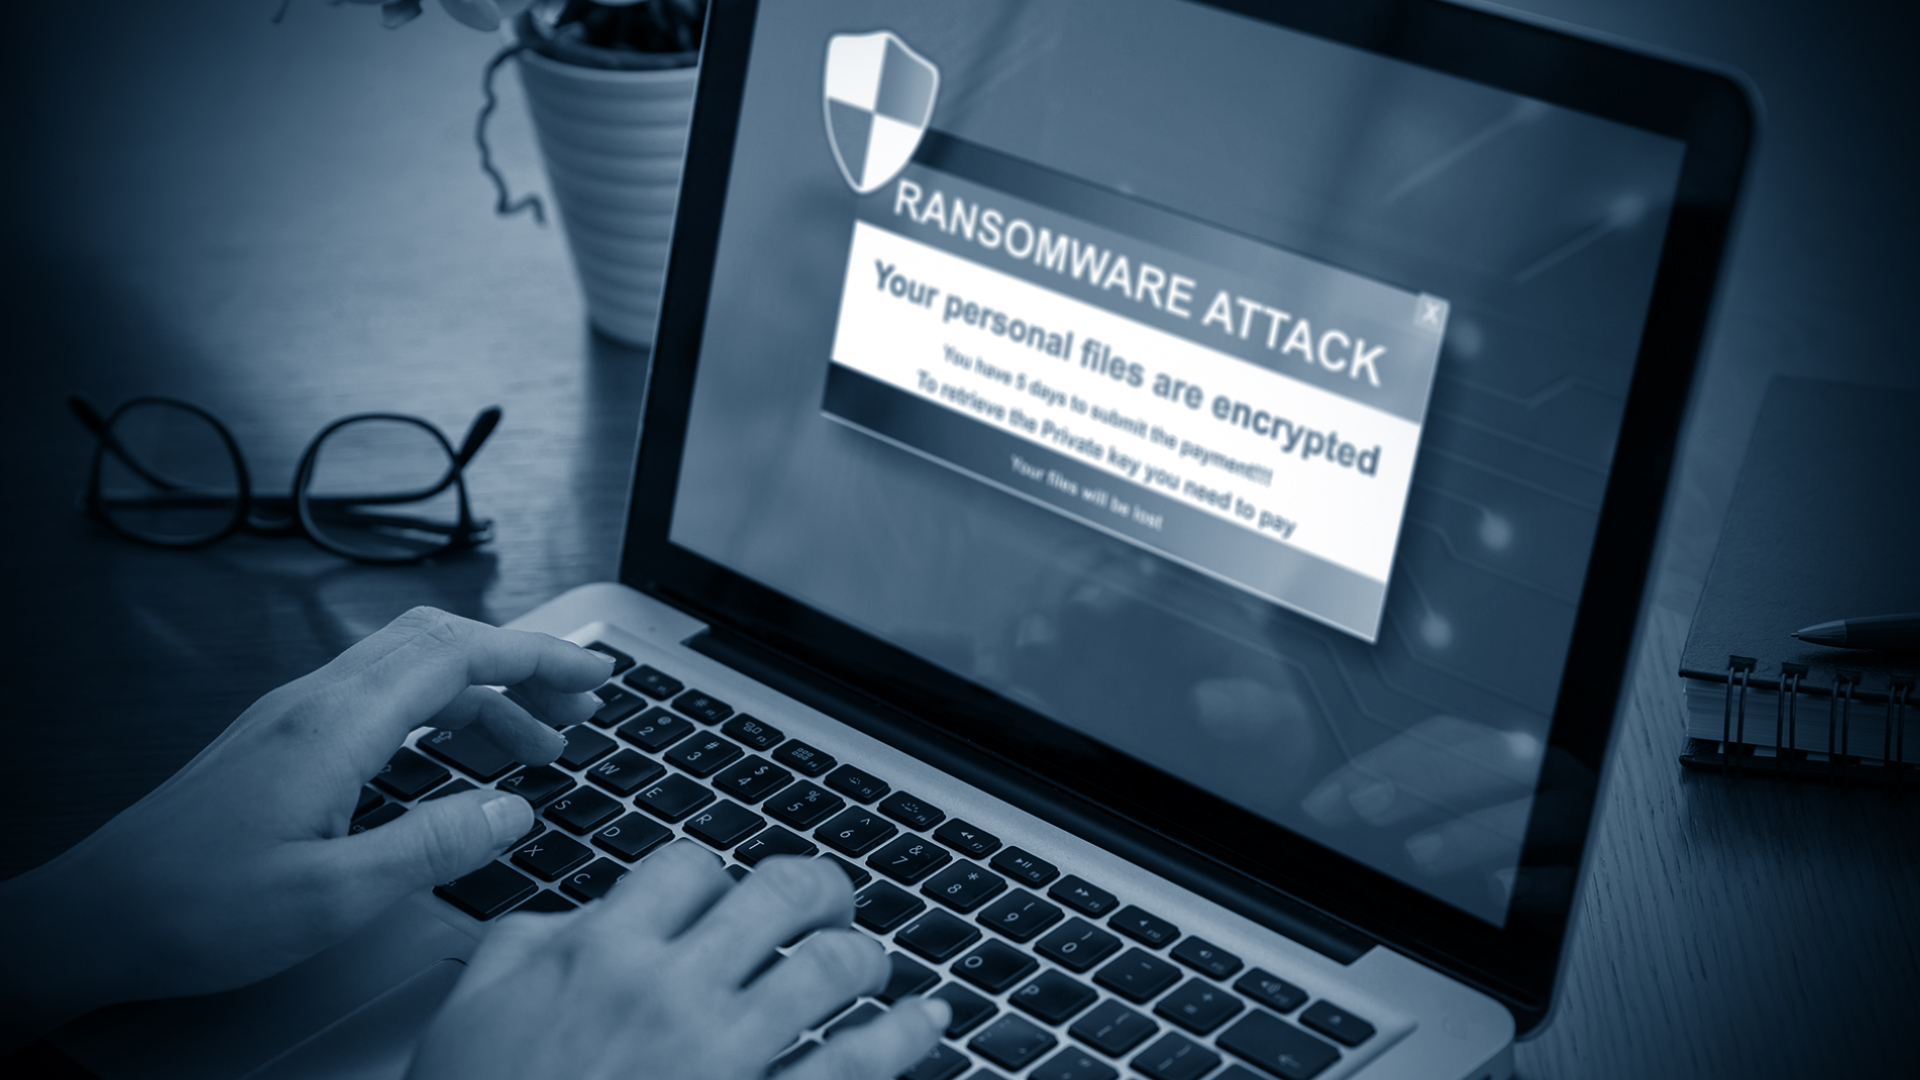 RaaS ransomware as a service Telsy pc